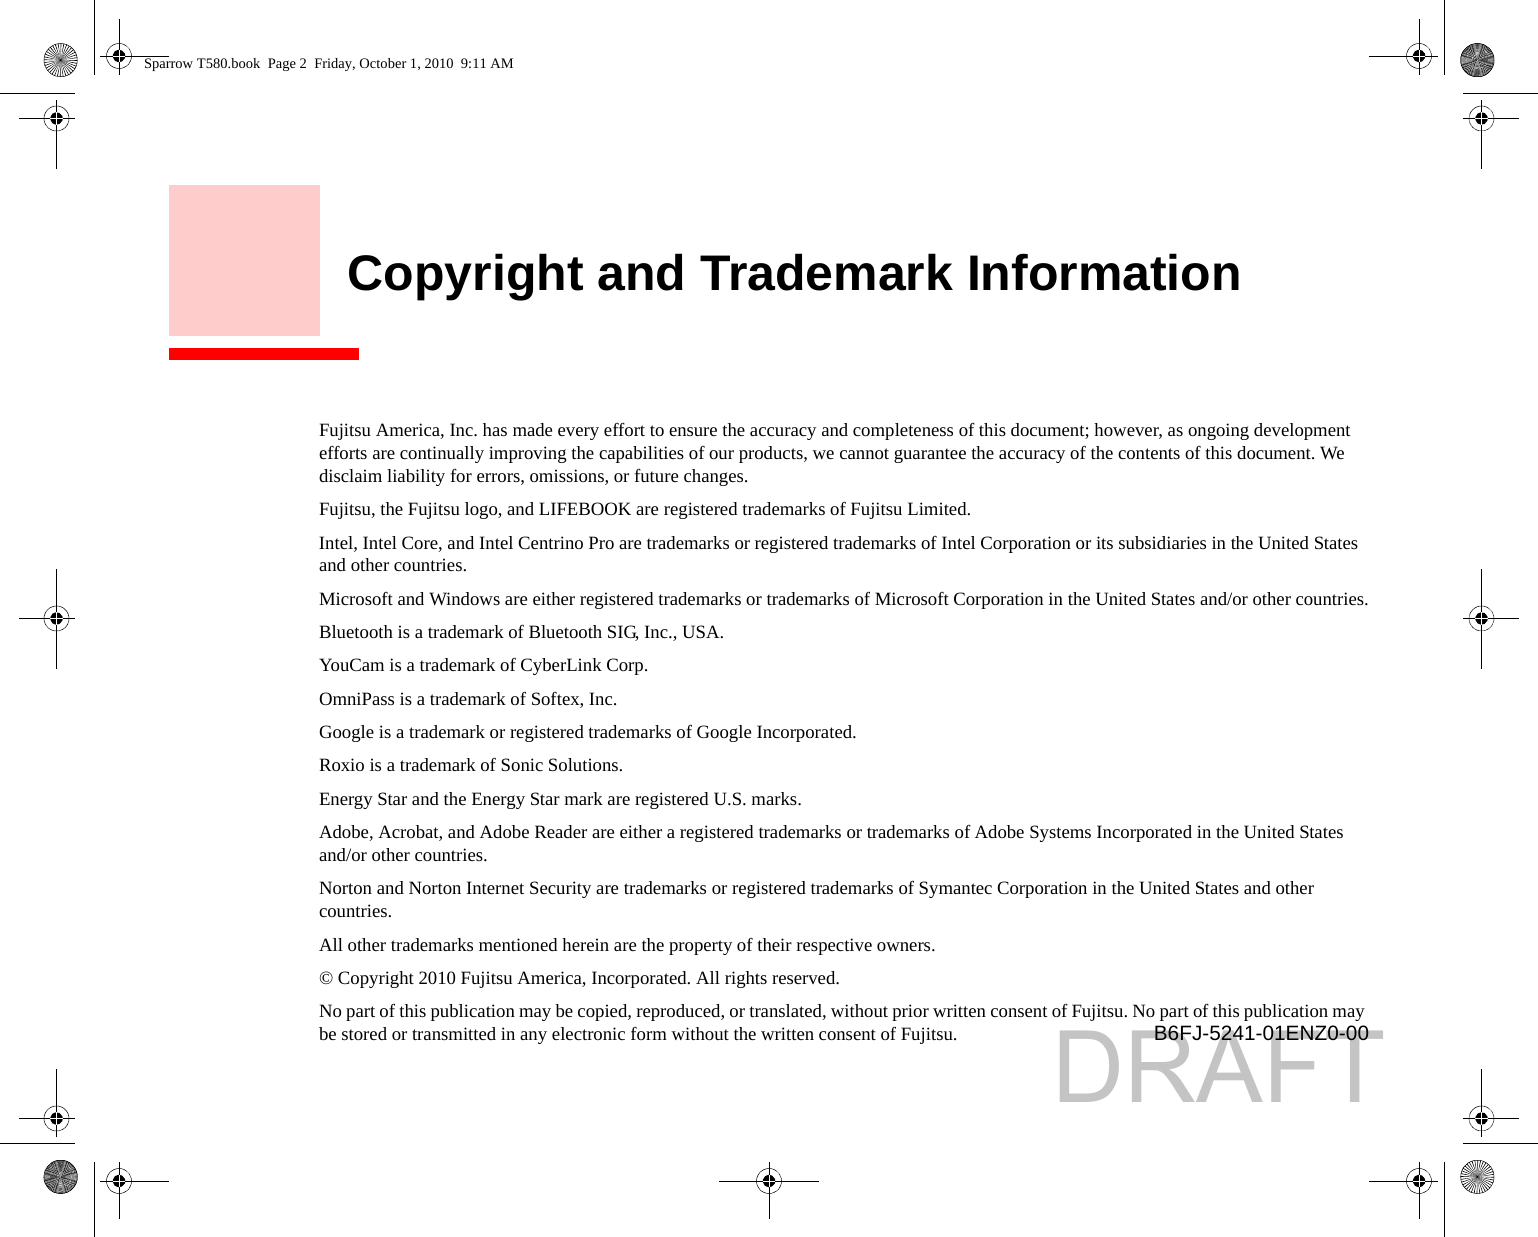     Copyright and Trademark InformationFujitsu America, Inc. has made every effort to ensure the accuracy and completeness of this document; however, as ongoing development efforts are continually improving the capabilities of our products, we cannot guarantee the accuracy of the contents of this document. We disclaim liability for errors, omissions, or future changes.Fujitsu, the Fujitsu logo, and LIFEBOOK are registered trademarks of Fujitsu Limited.Intel, Intel Core, and Intel Centrino Pro are trademarks or registered trademarks of Intel Corporation or its subsidiaries in the United States and other countries.Microsoft and Windows are either registered trademarks or trademarks of Microsoft Corporation in the United States and/or other countries.Bluetooth is a trademark of Bluetooth SIG, Inc., USA.YouCam is a trademark of CyberLink Corp.OmniPass is a trademark of Softex, Inc.Google is a trademark or registered trademarks of Google Incorporated.Roxio is a trademark of Sonic Solutions.Energy Star and the Energy Star mark are registered U.S. marks.Adobe, Acrobat, and Adobe Reader are either a registered trademarks or trademarks of Adobe Systems Incorporated in the United States and/or other countries.Norton and Norton Internet Security are trademarks or registered trademarks of Symantec Corporation in the United States and other countries.All other trademarks mentioned herein are the property of their respective owners.© Copyright 2010 Fujitsu America, Incorporated. All rights reserved. No part of this publication may be copied, reproduced, or translated, without prior written consent of Fujitsu. No part of this publication may be stored or transmitted in any electronic form without the written consent of Fujitsu.  B6FJ-5241-01ENZ0-00Sparrow T580.book  Page 2  Friday, October 1, 2010  9:11 AMDRAFT